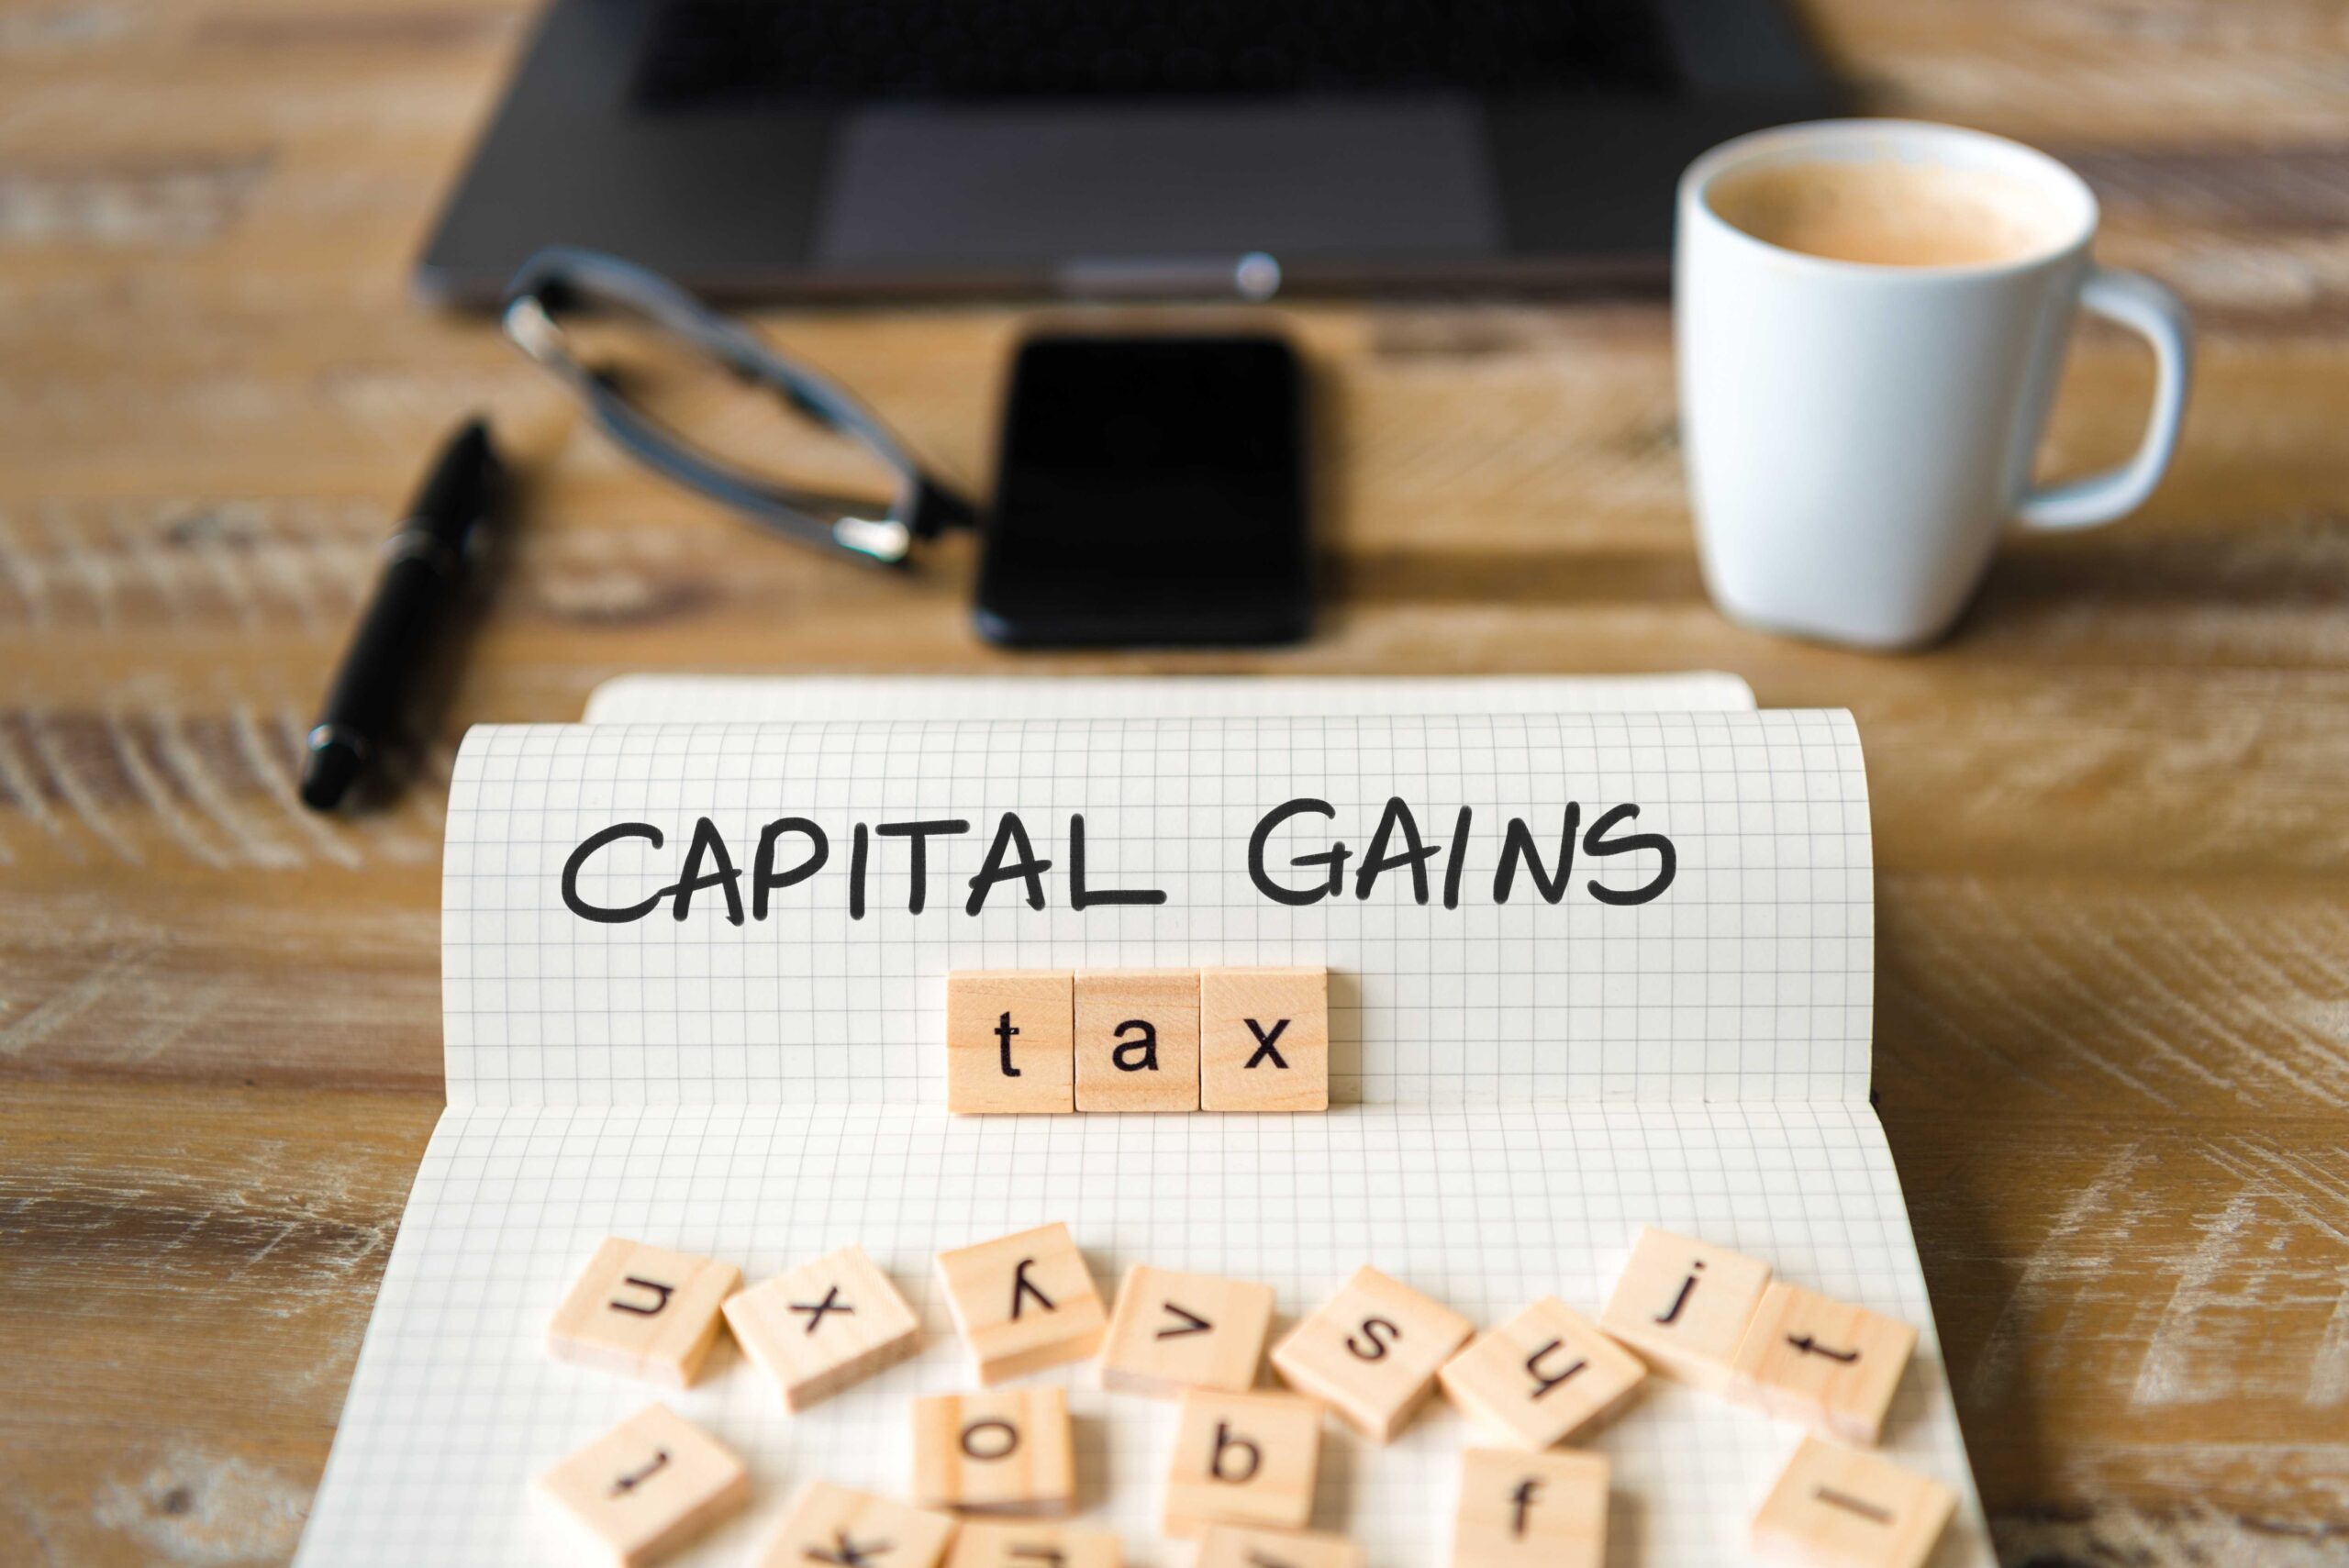 A graphic showing a piece of paper with 'Capital Gains' handwritten on the page and wooden squares with letters on scattered across it. The wooden squares spell out 'tax' beneath 'Capital Gains'.